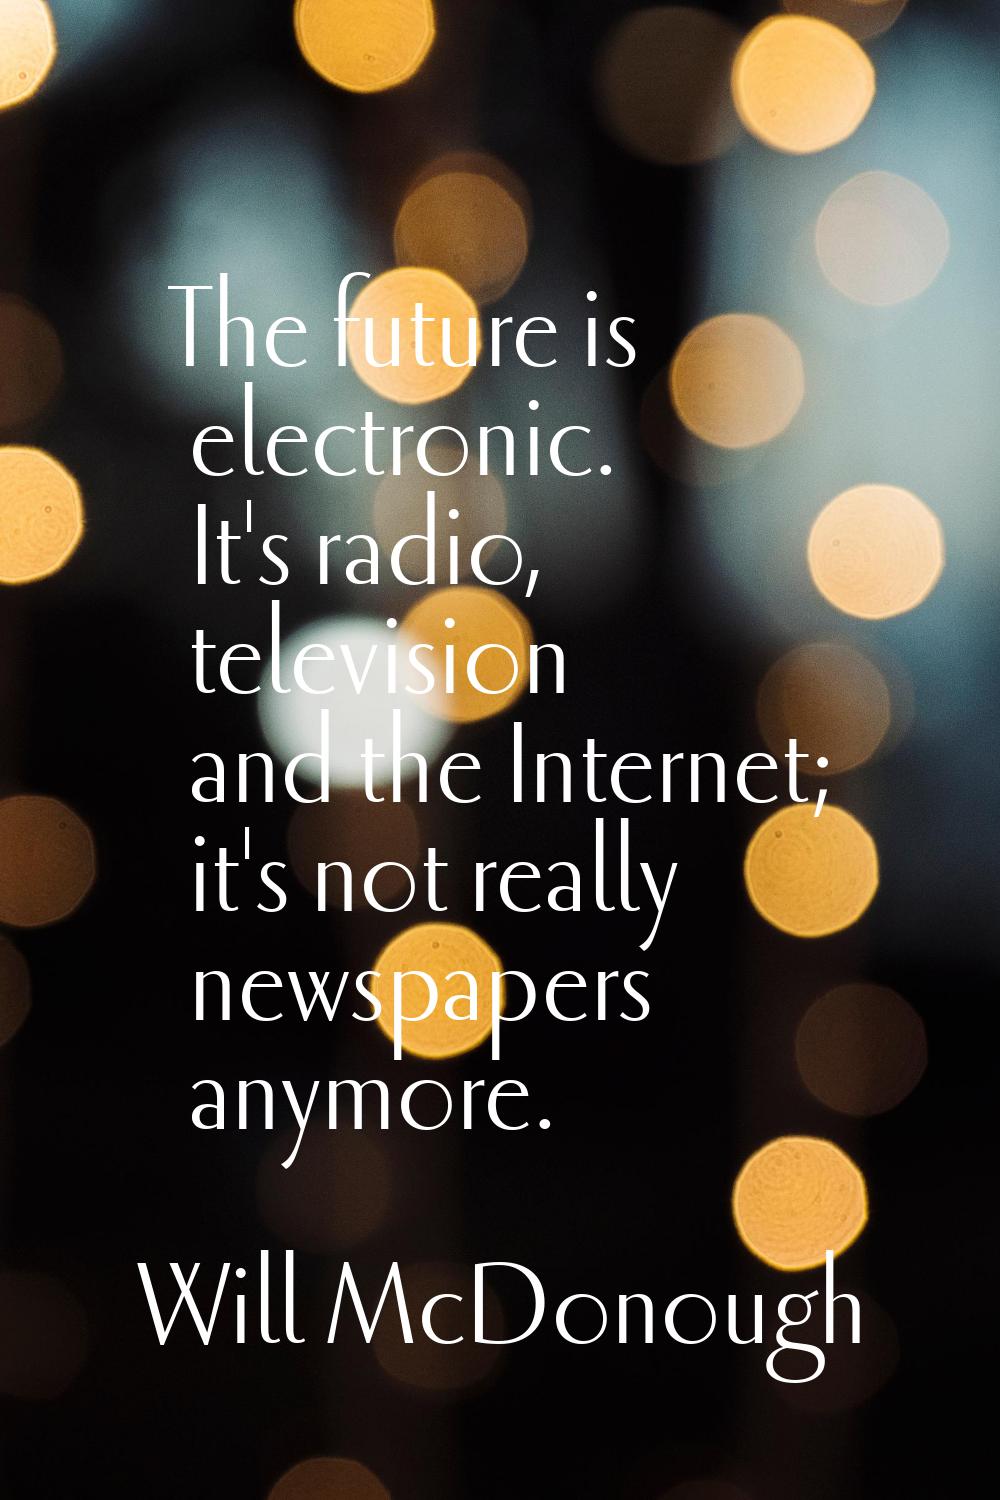 The future is electronic. It's radio, television and the Internet; it's not really newspapers anymo